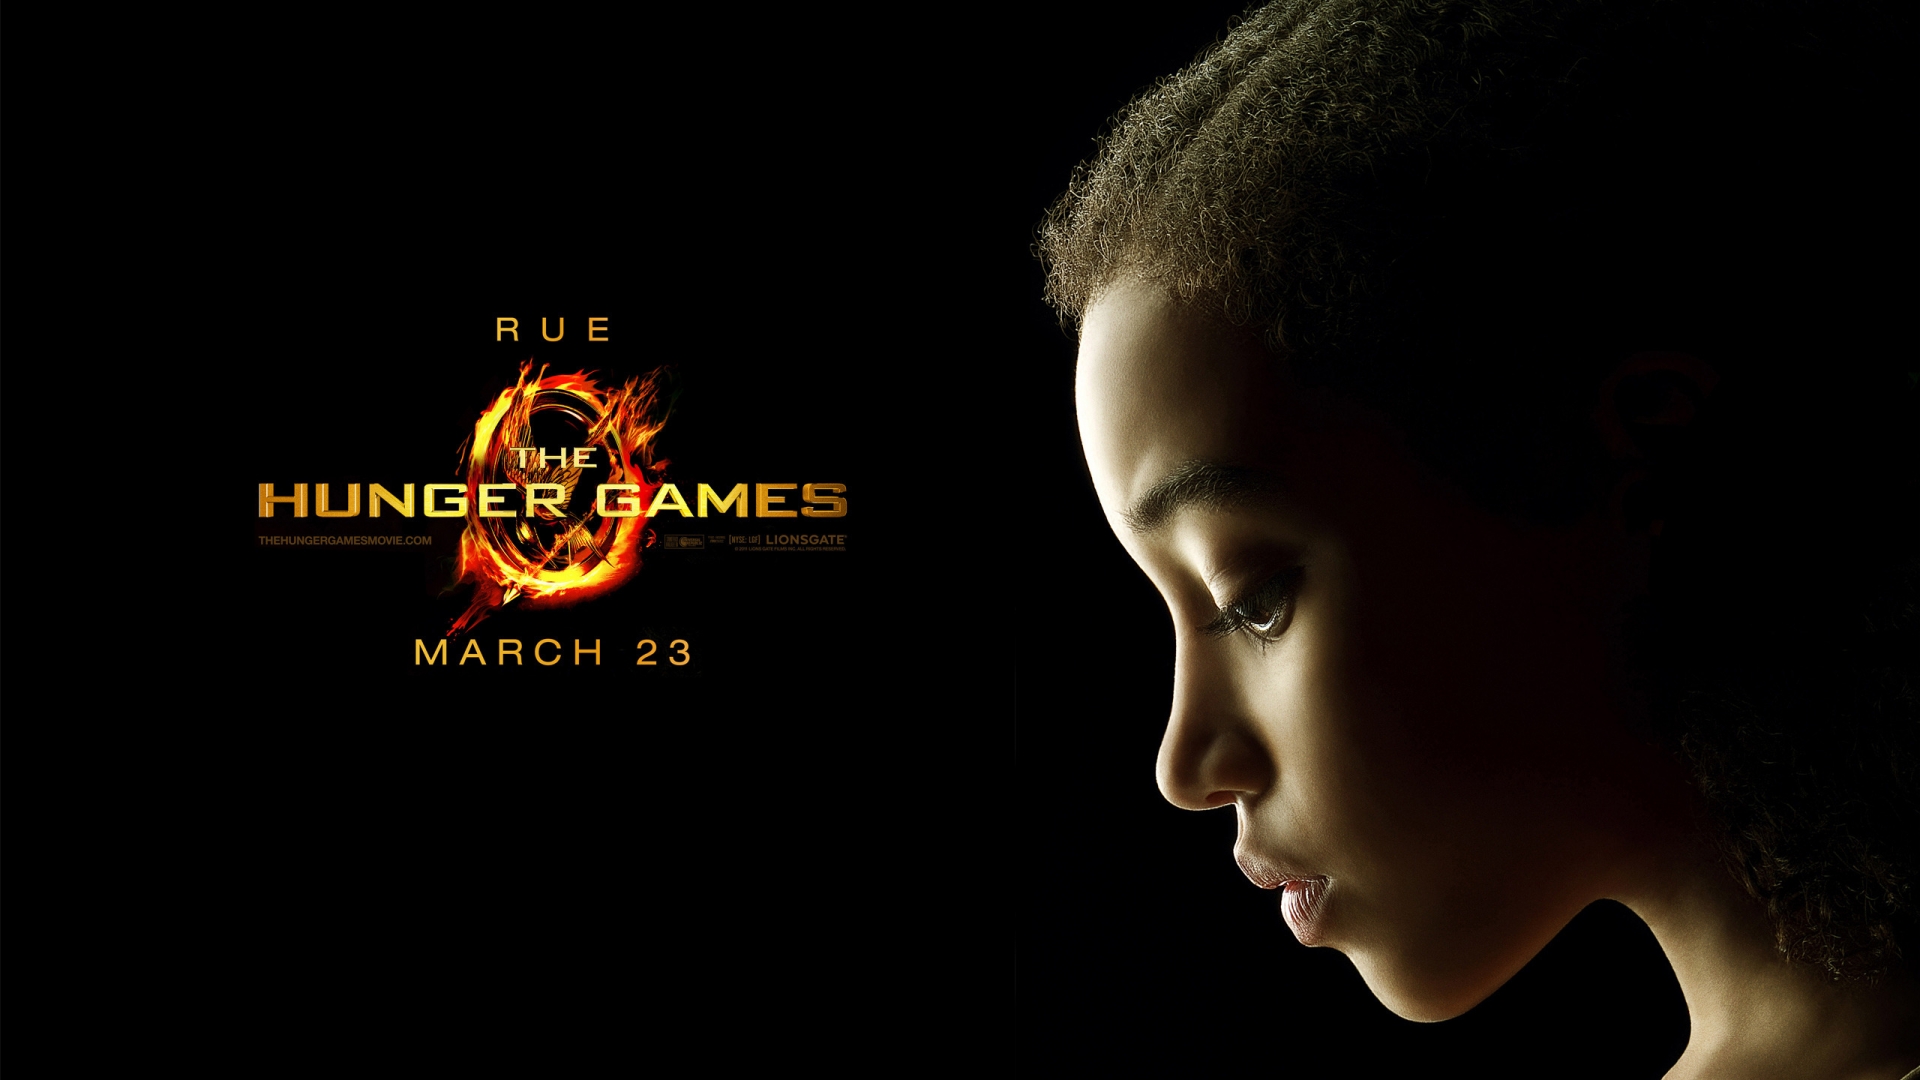 The Hunger Games Rue for 1920 x 1080 HDTV 1080p resolution